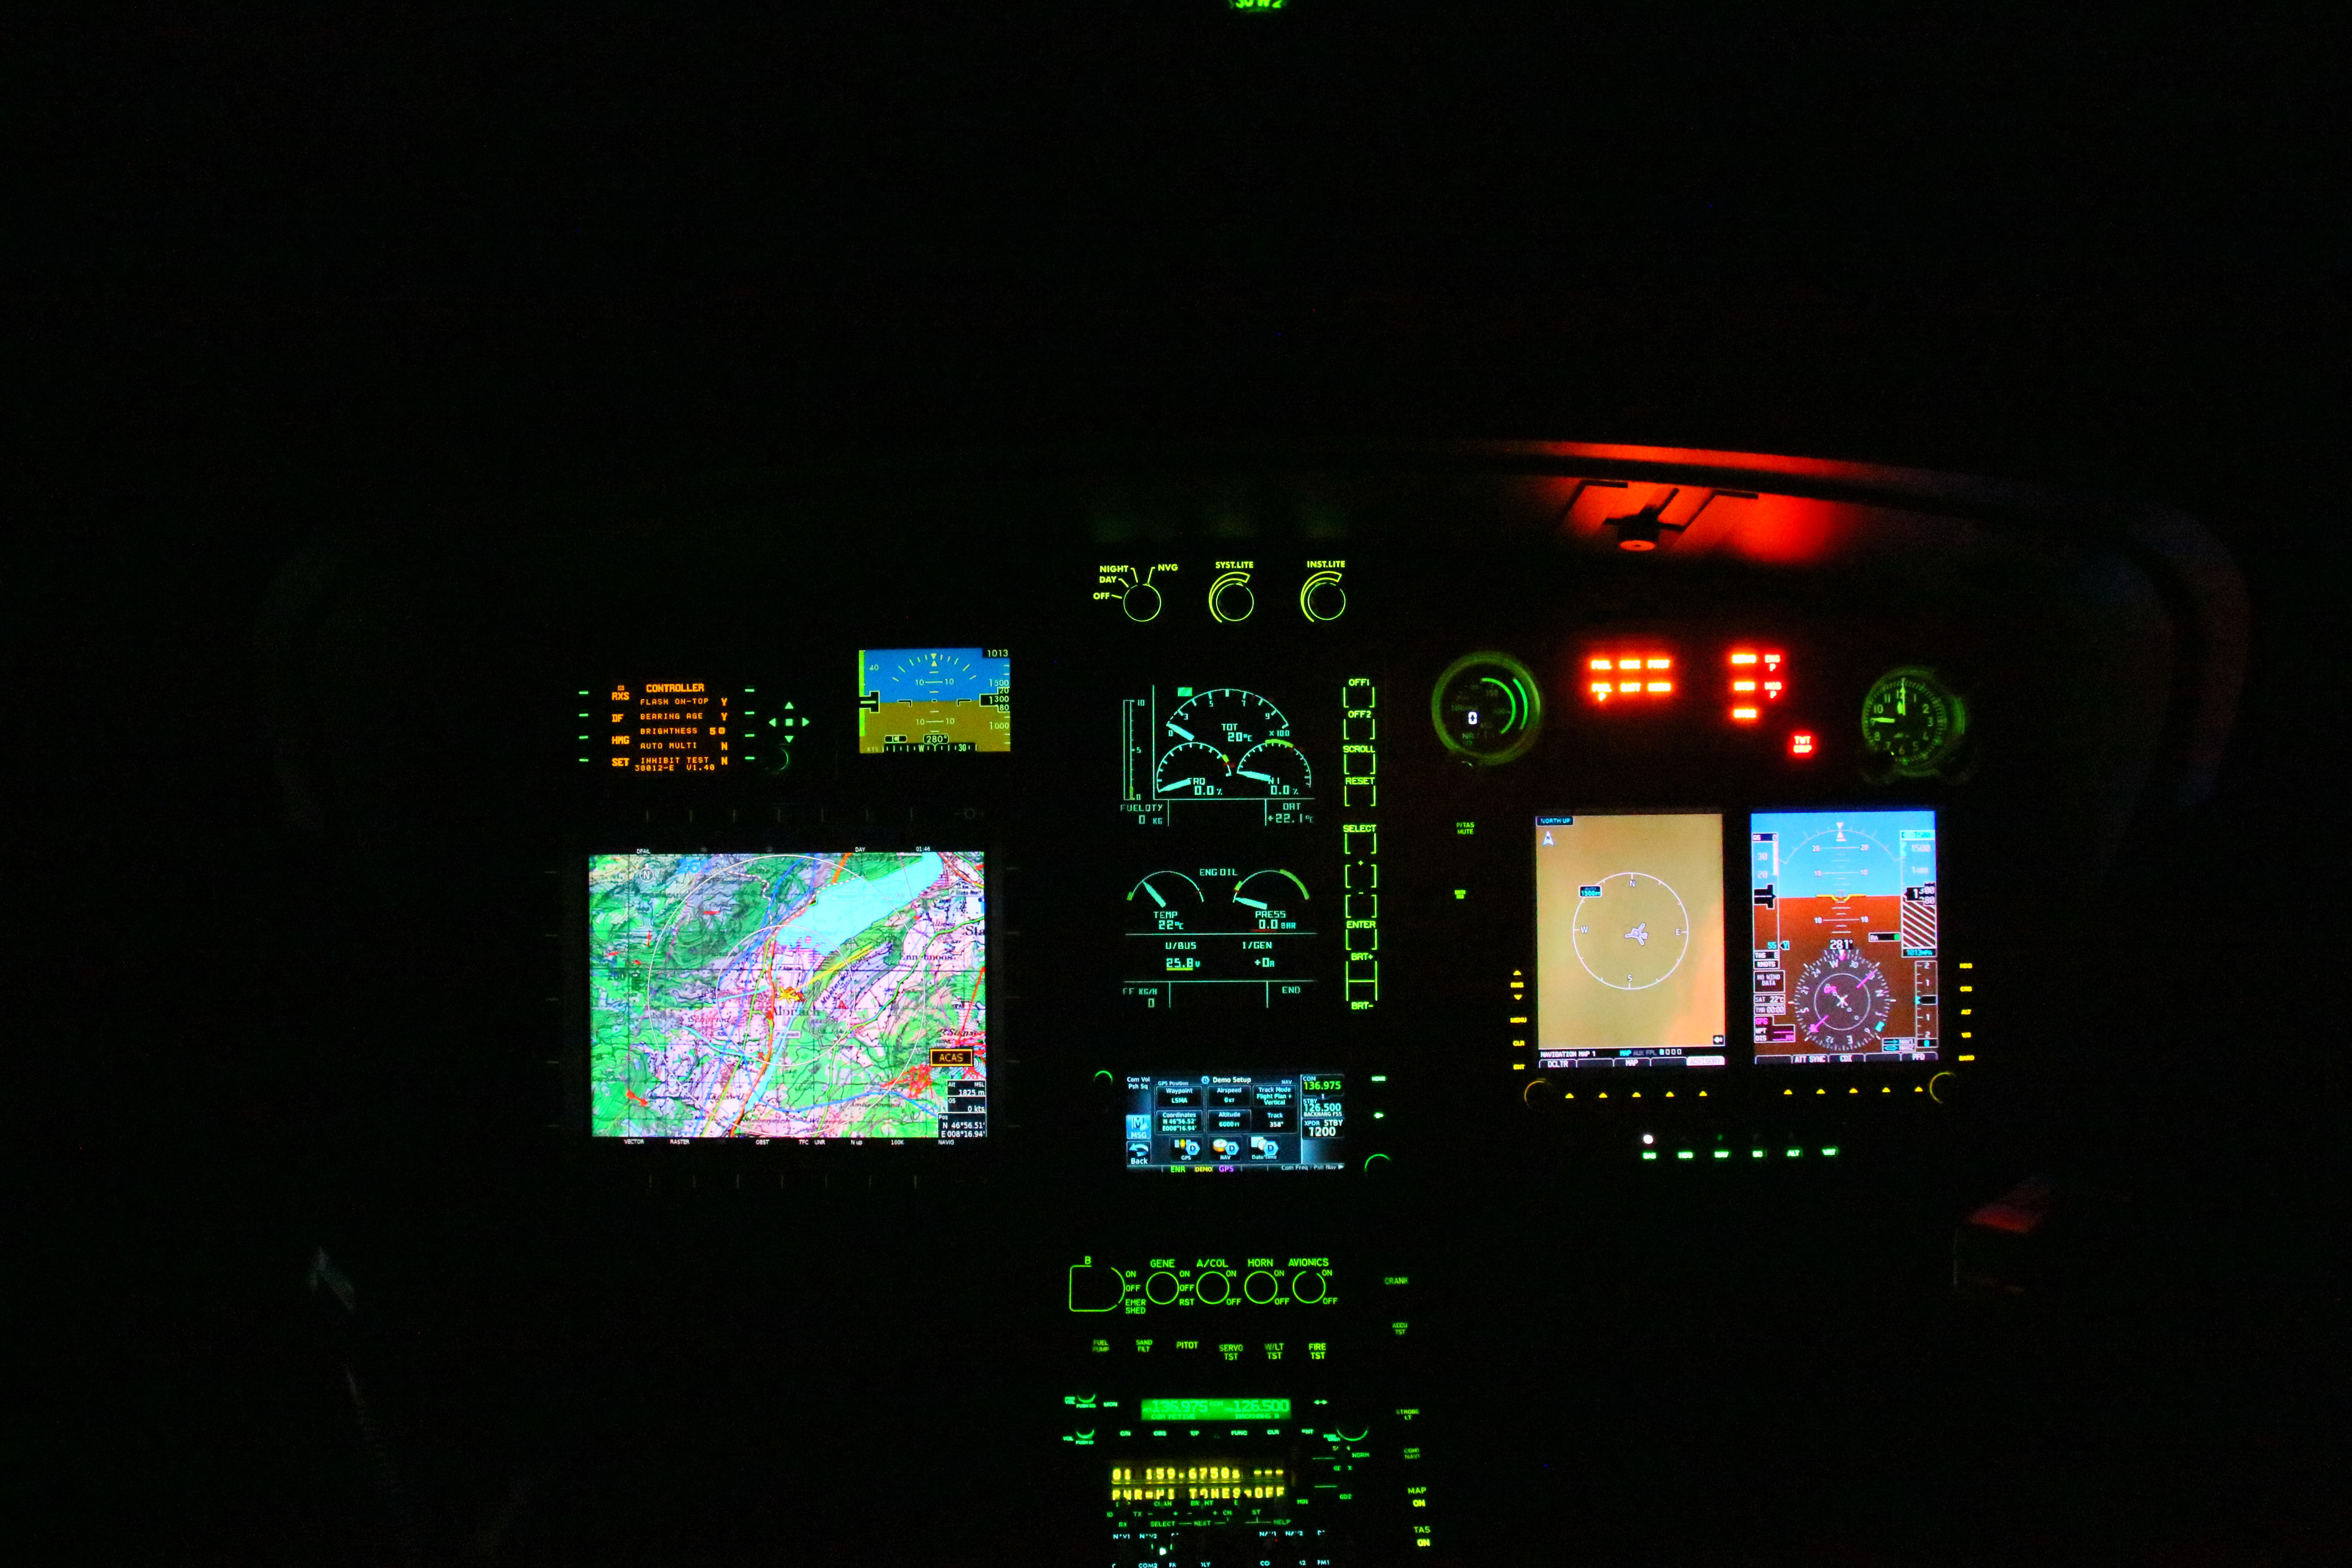 DOA scope expansion NVIS cockpit at night